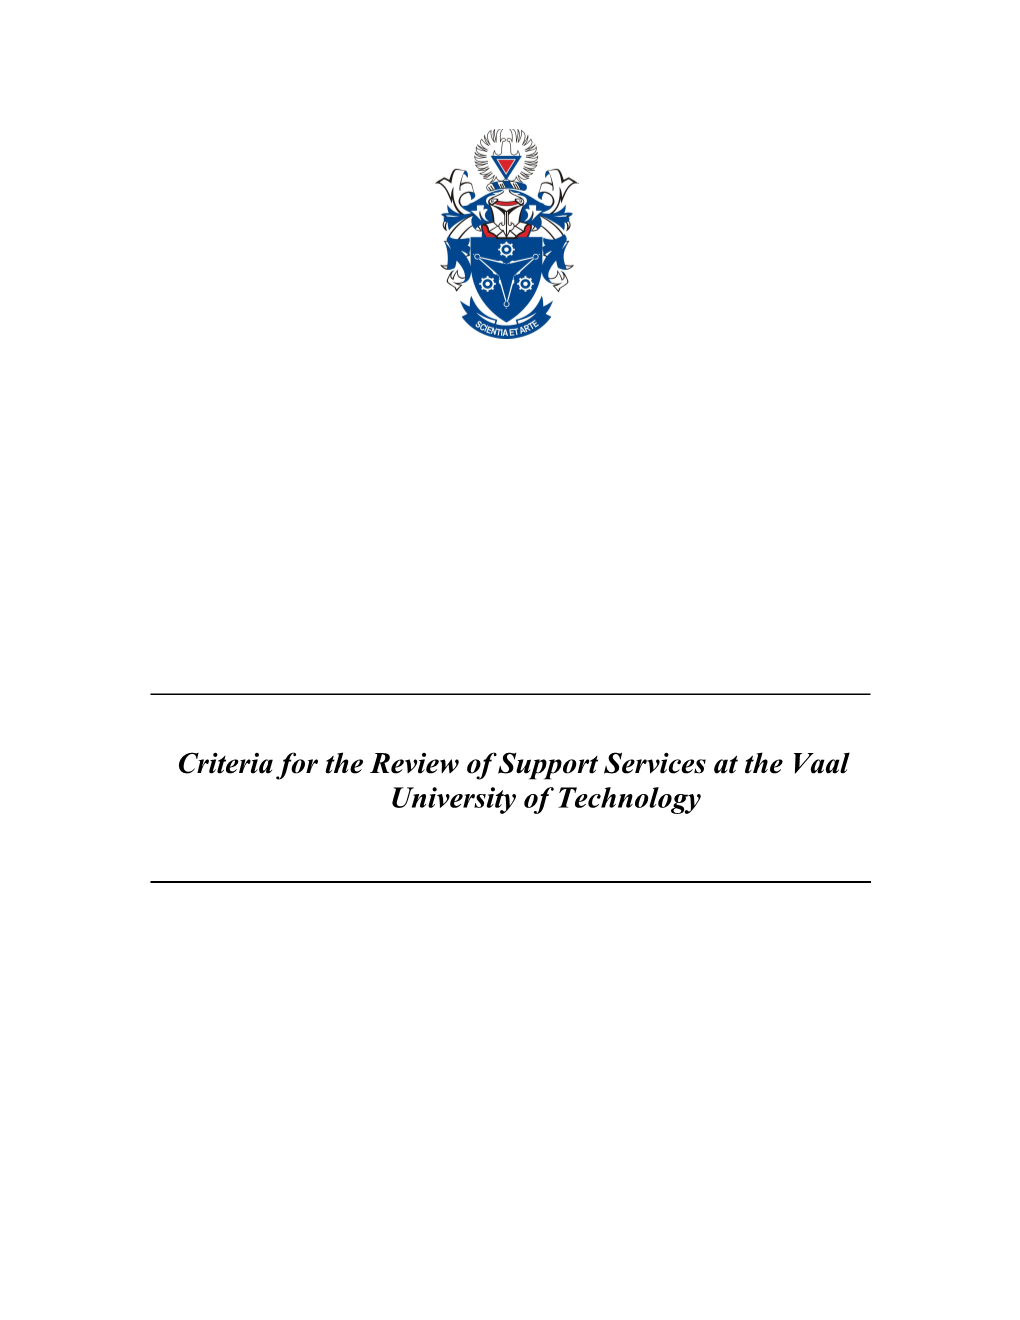 Criteria for the Review of Support Services at the Vaaluniversity of Technology